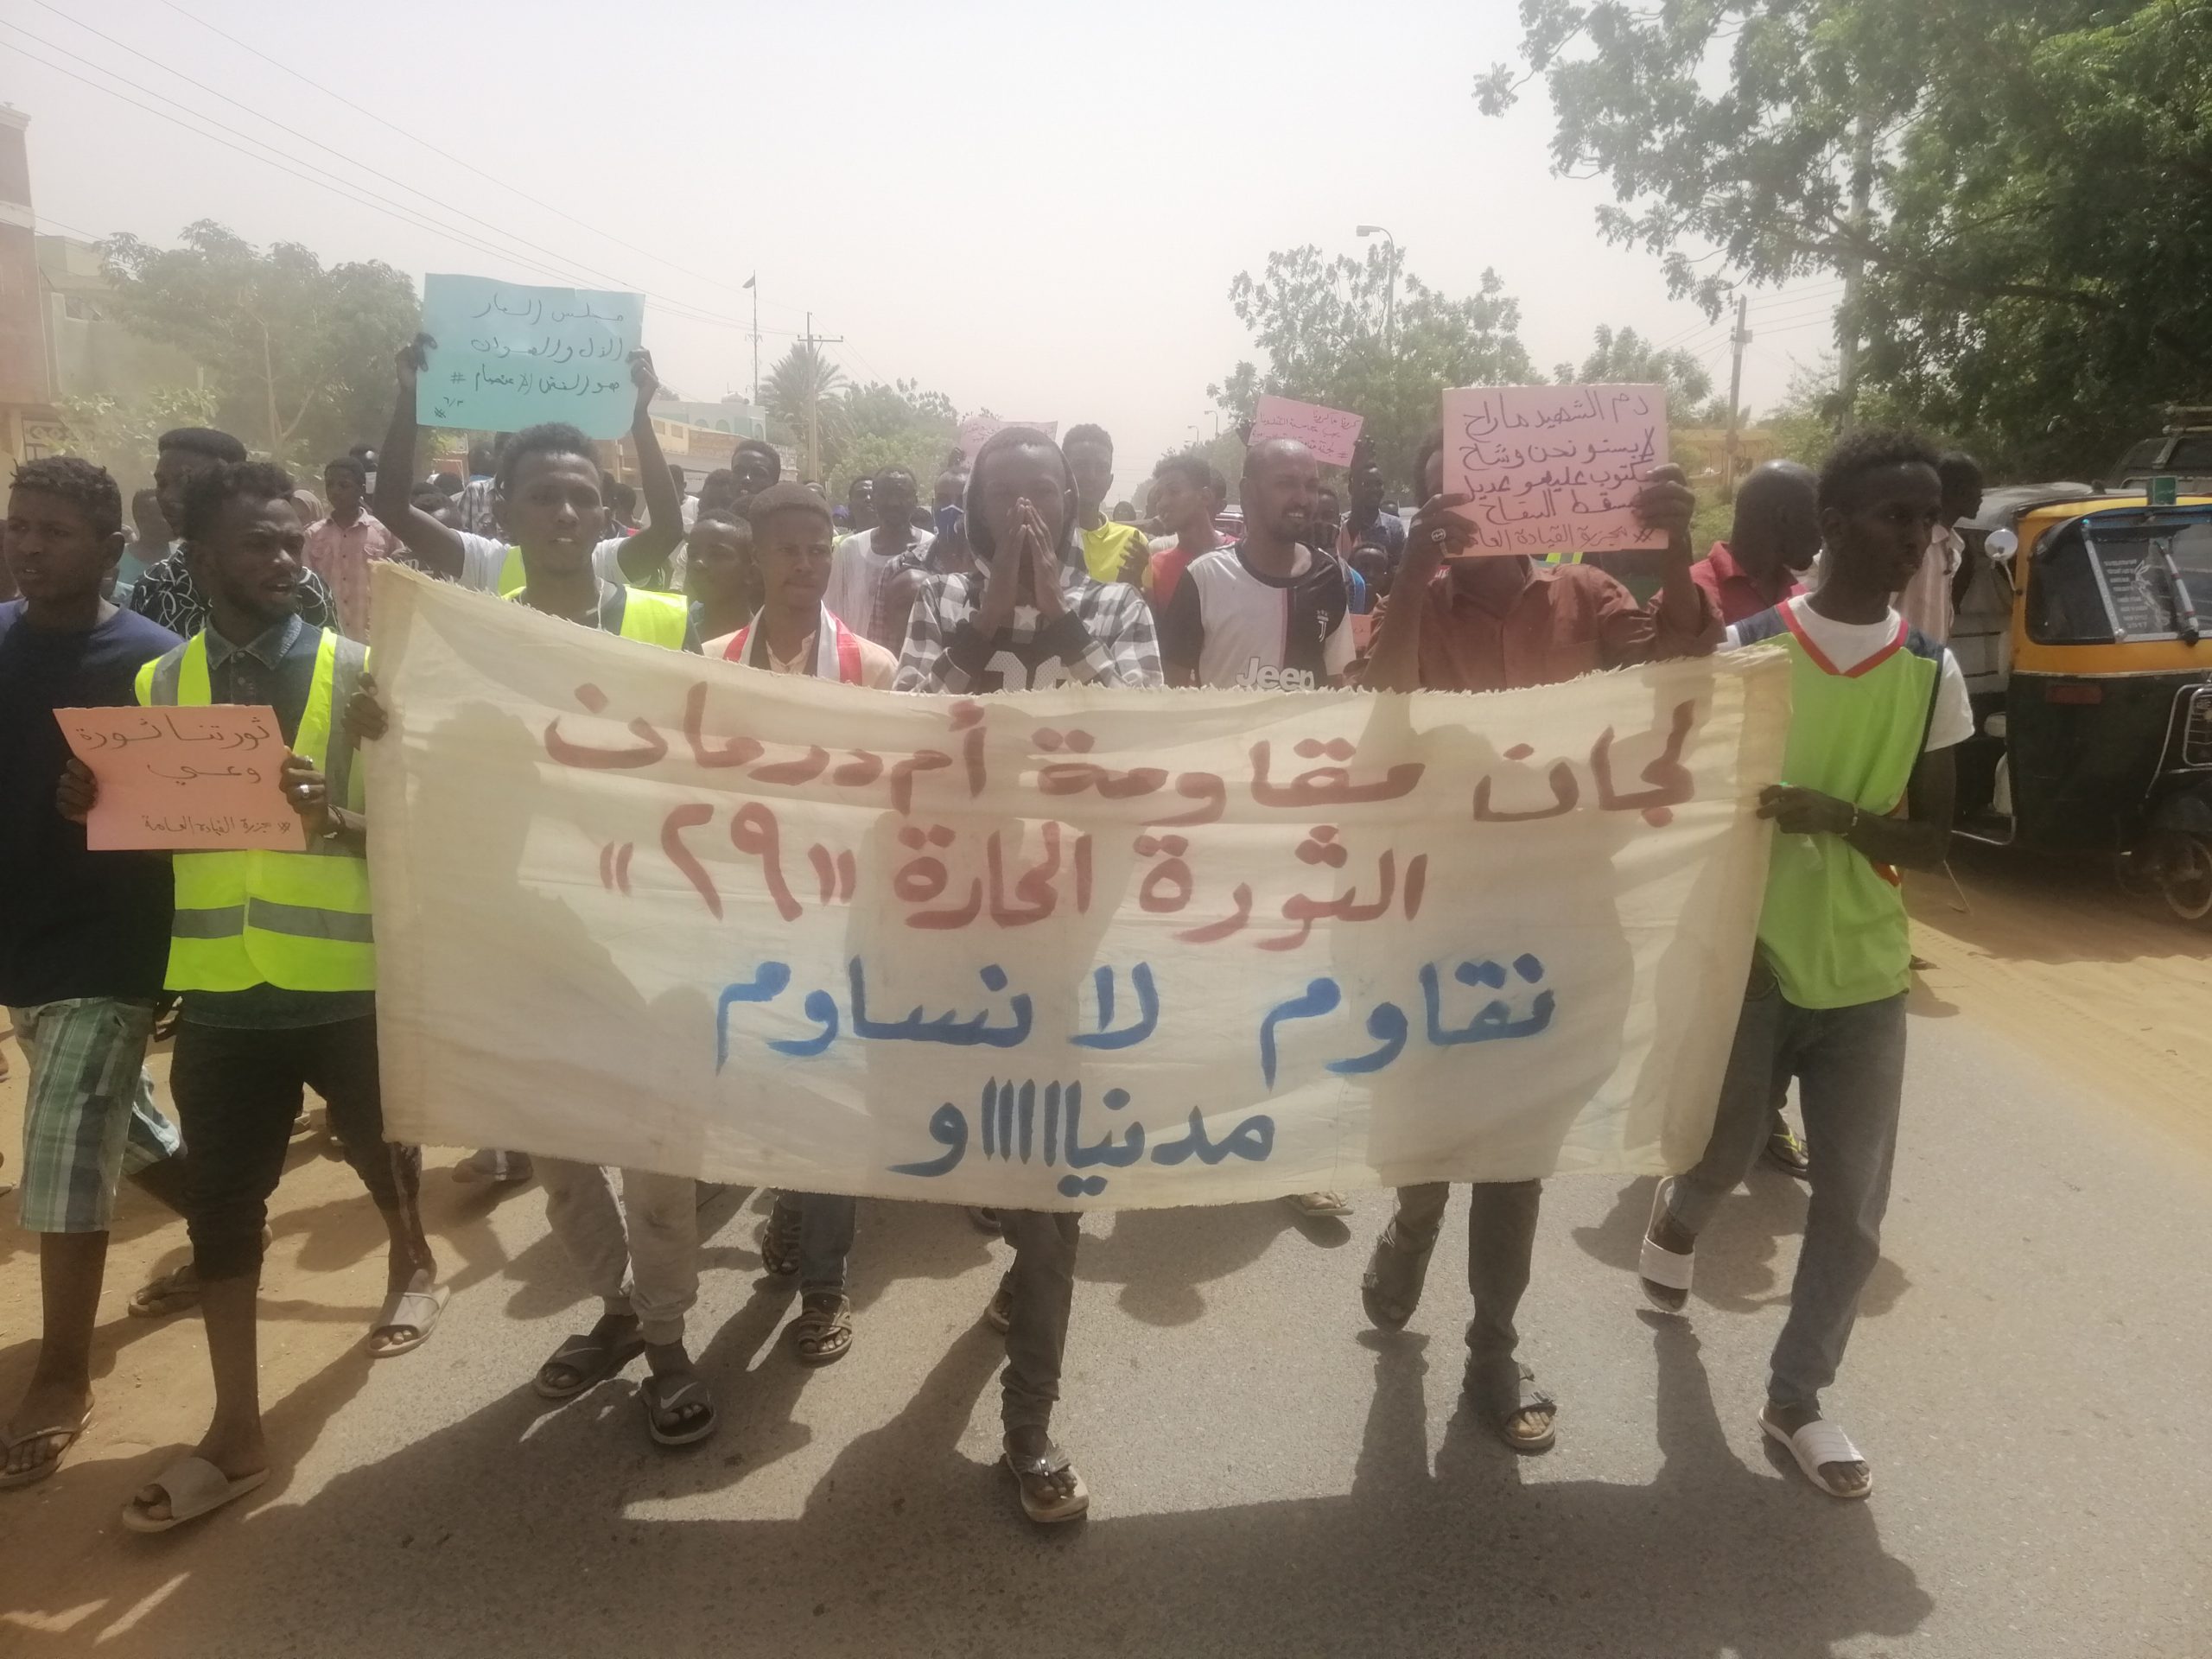 FIRST ANNIVERSARY OF SUDAN SIT-IN DISPERSAL, JUSTICE STILL ABSENCE